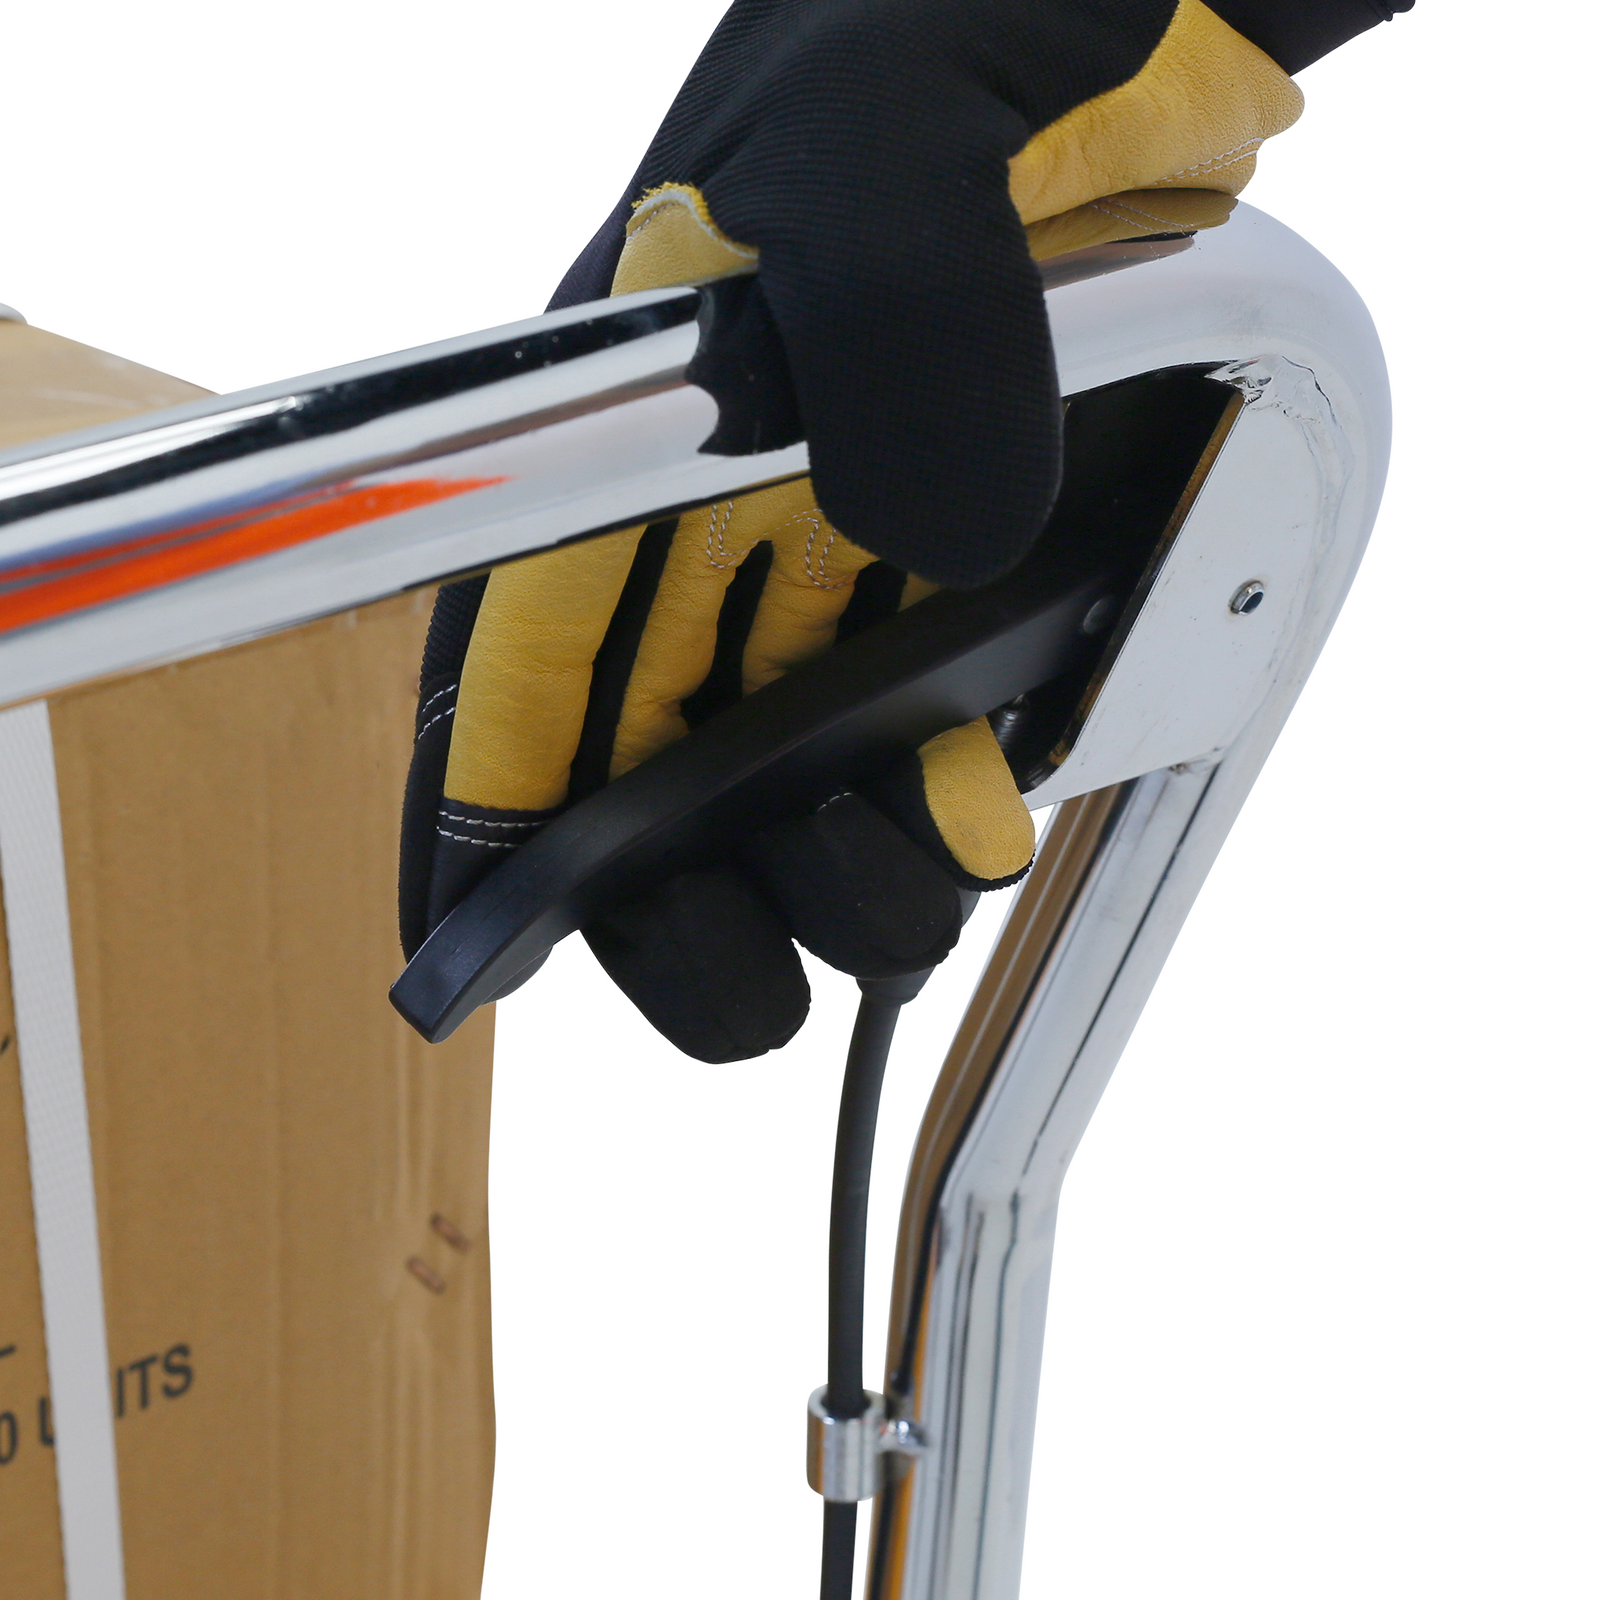 The hand of a person wearing mechanical gloves is pressing the handle activator to lower the table lift of the JORES TECHNOLOGIES® scissor lift table